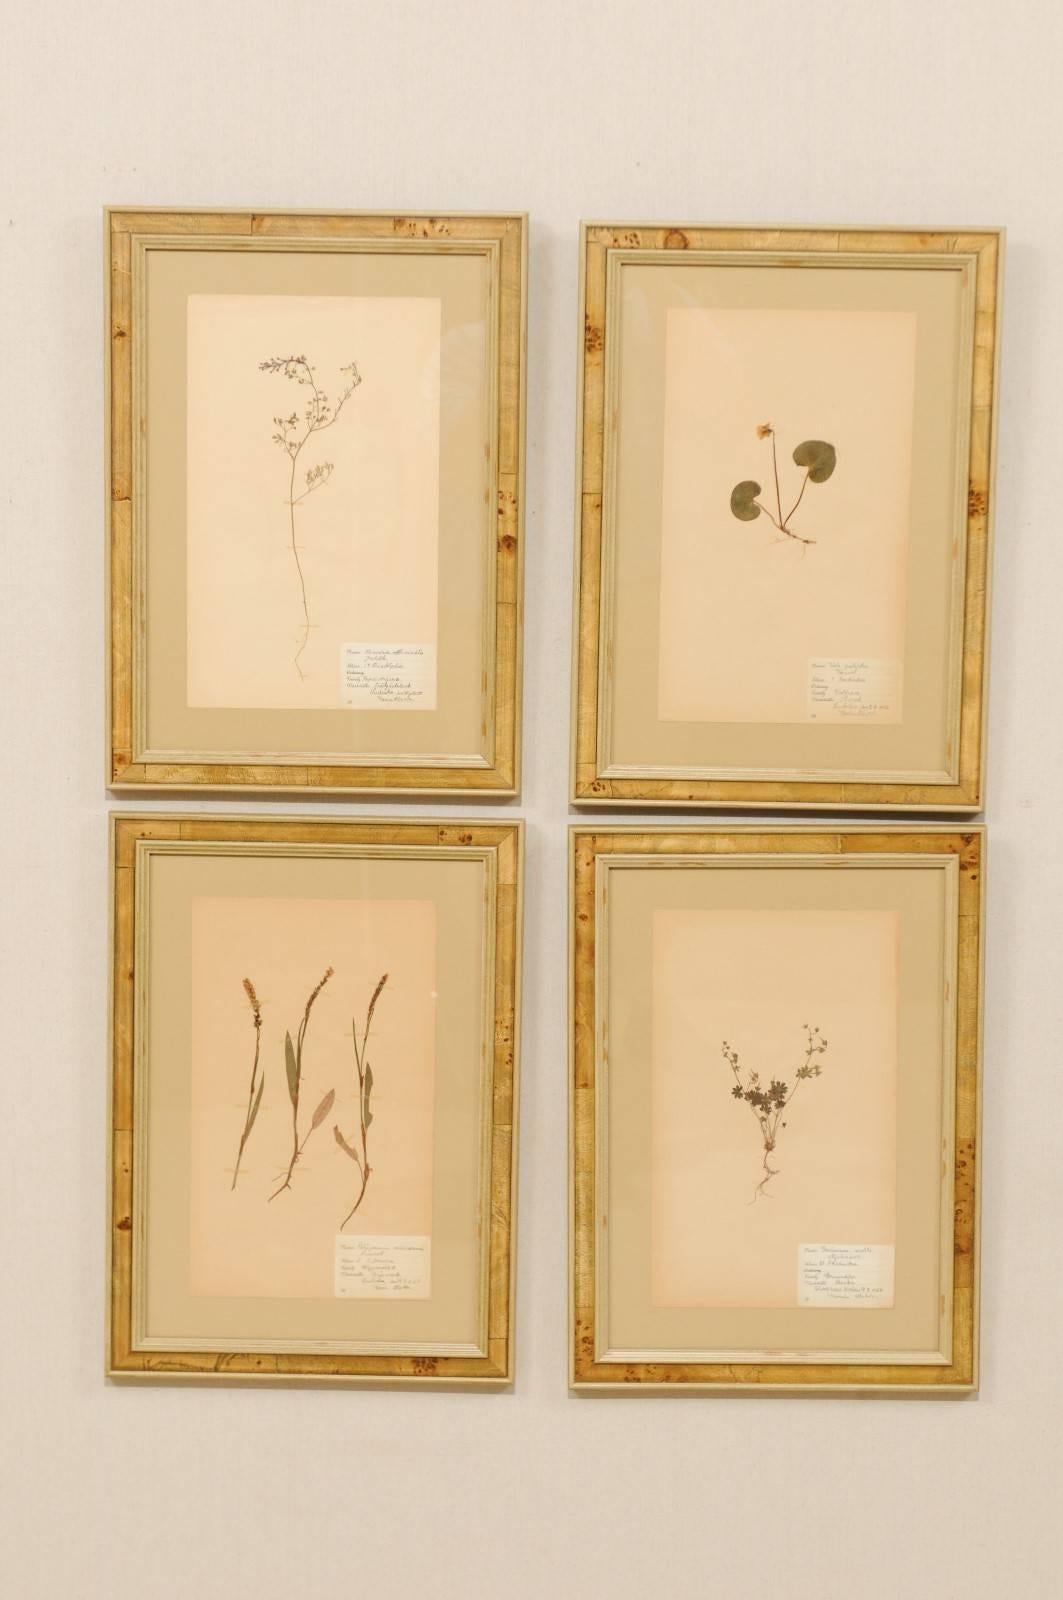 A set of four Swedish framed herbariums or botanicals from the early 20th century. These Swedish 1930s herbariums are featured in custom light burl frames. Each pressed botanical specimens includes a hand written label with the plants name, variety